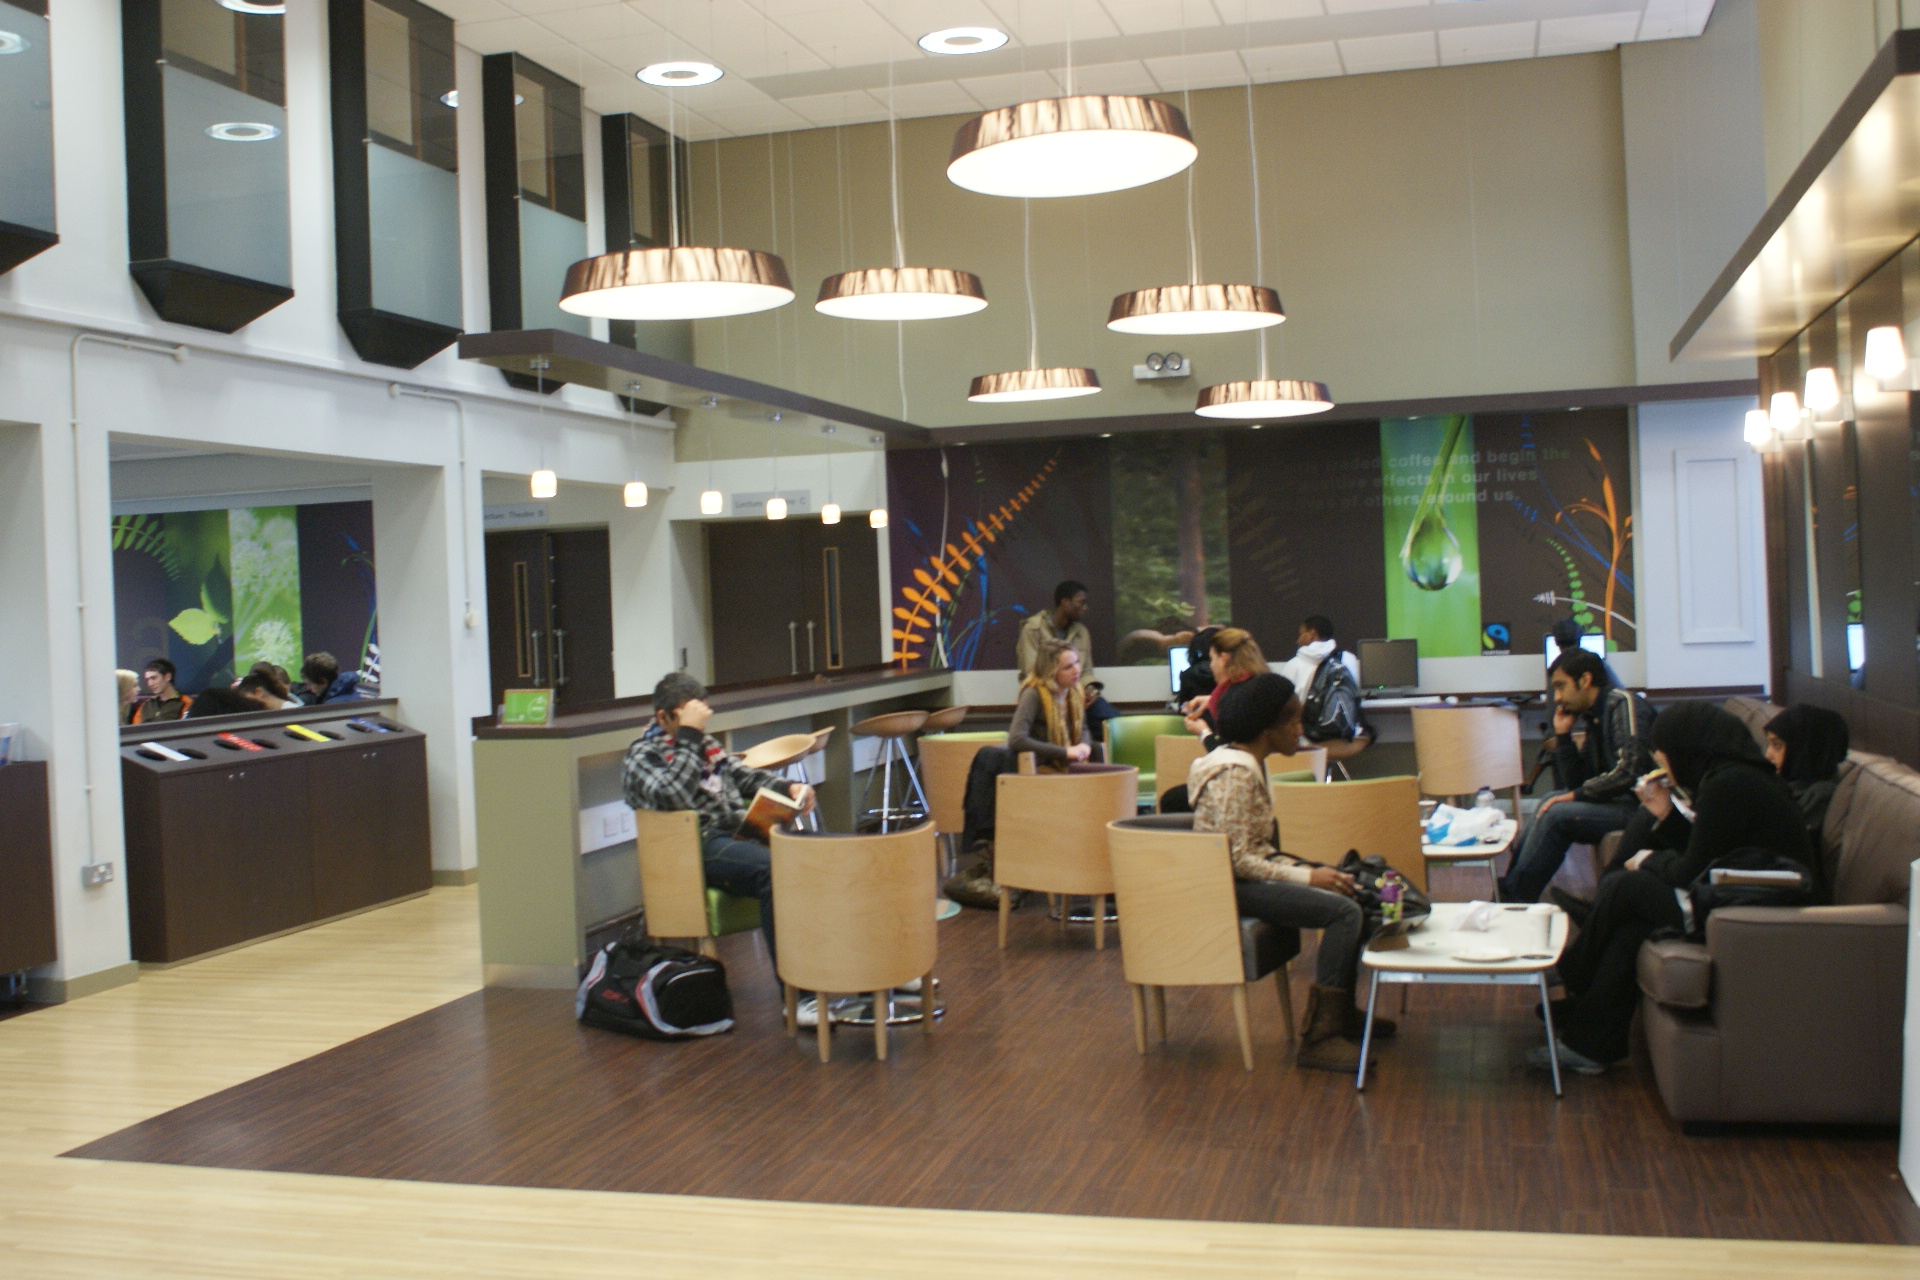  View of the café now in use by the University students and staff. 